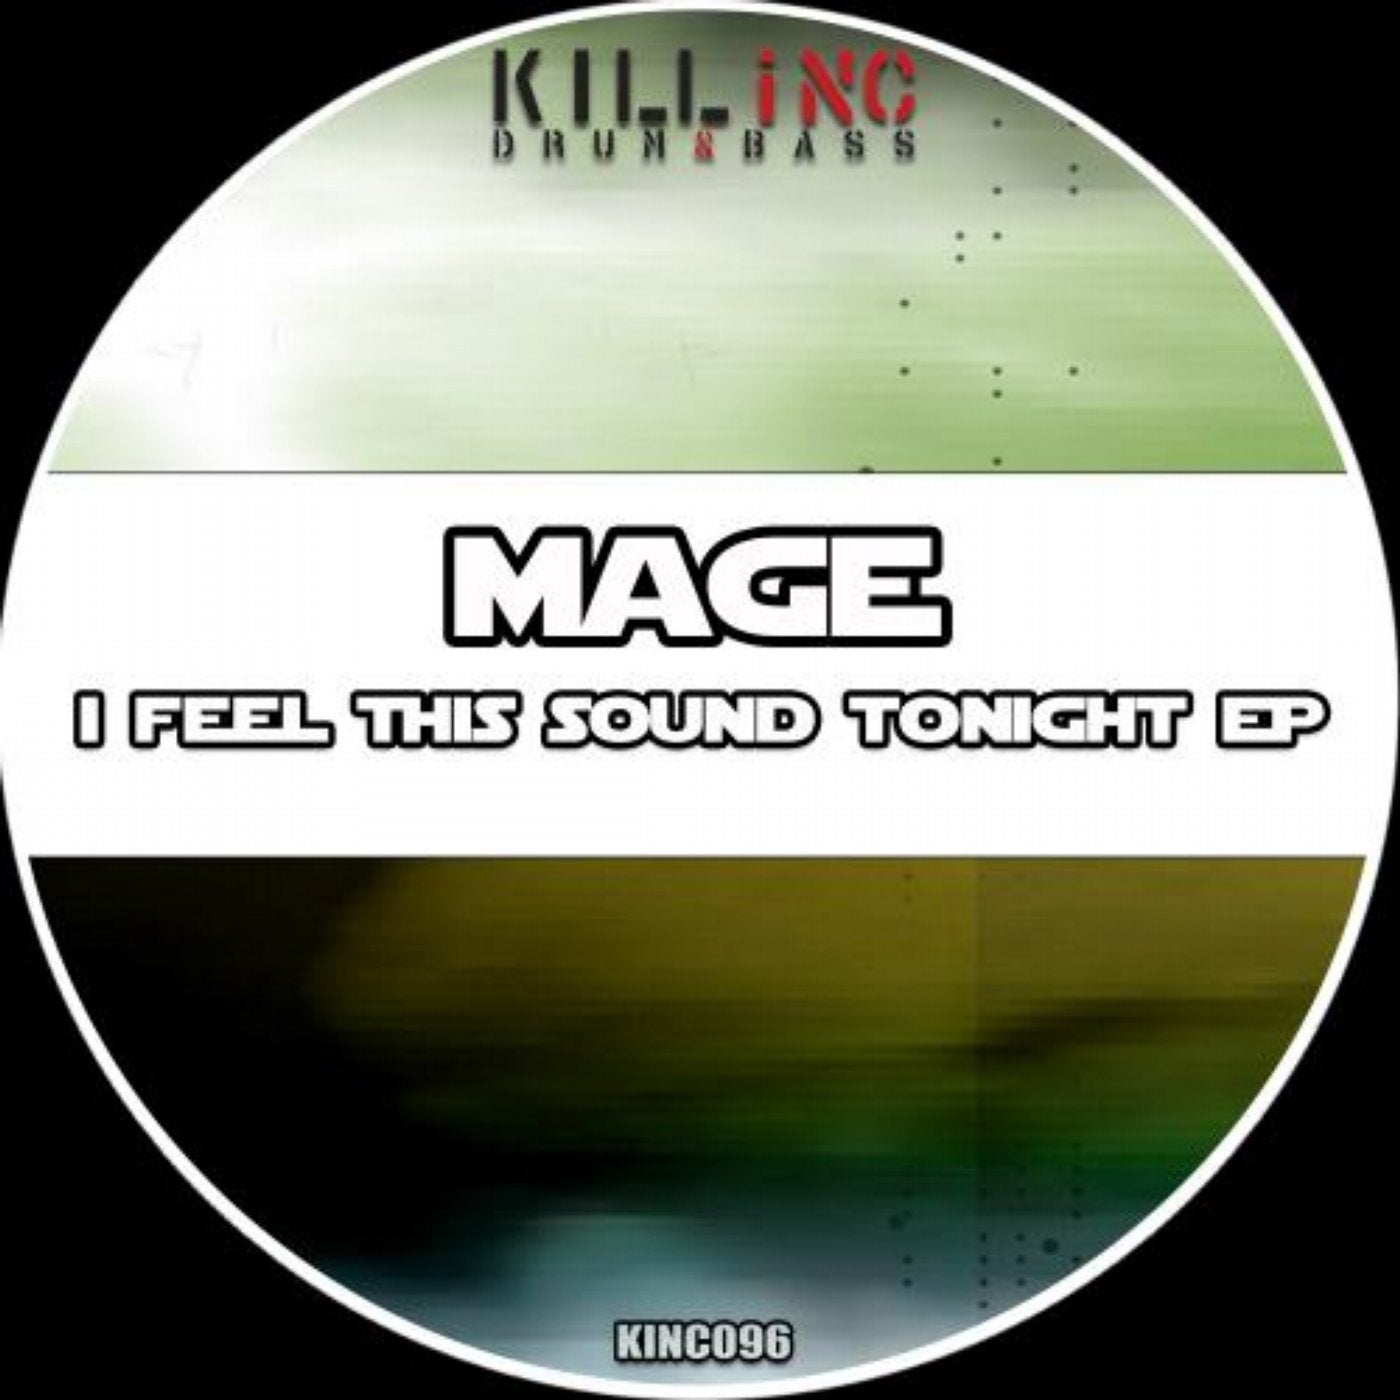 I Feel This Sound Tonight EP